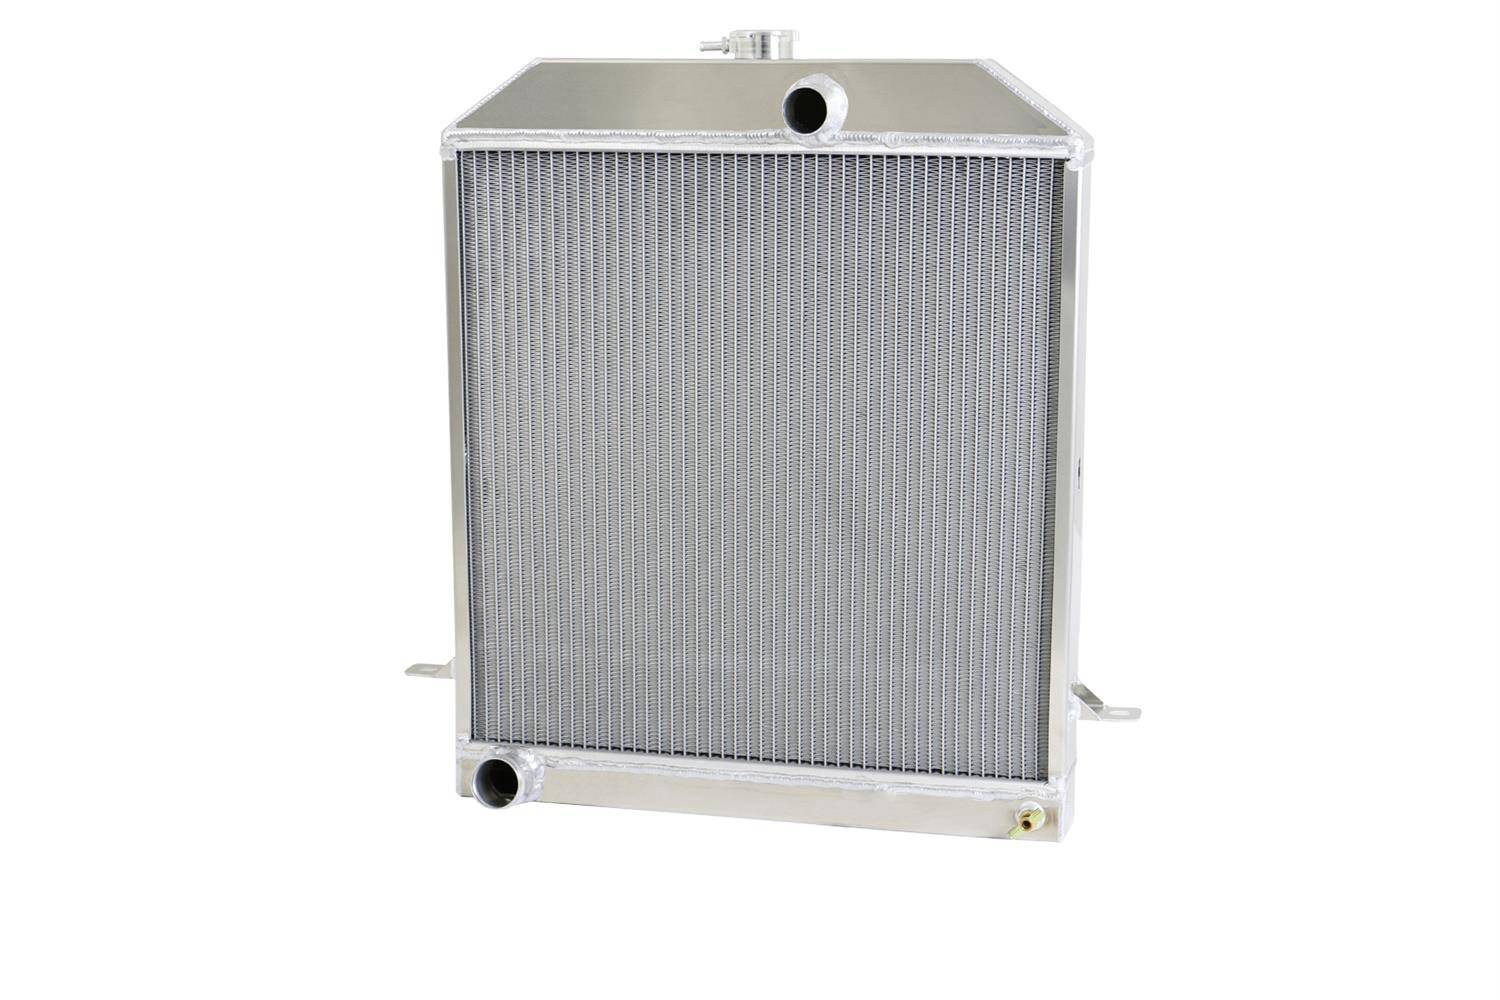 Wizard Cooling Inc - Wizard Cooling - 1940-1941 Ford Truck & 1939-1941 Car Aluminum Radiator - 98517-100